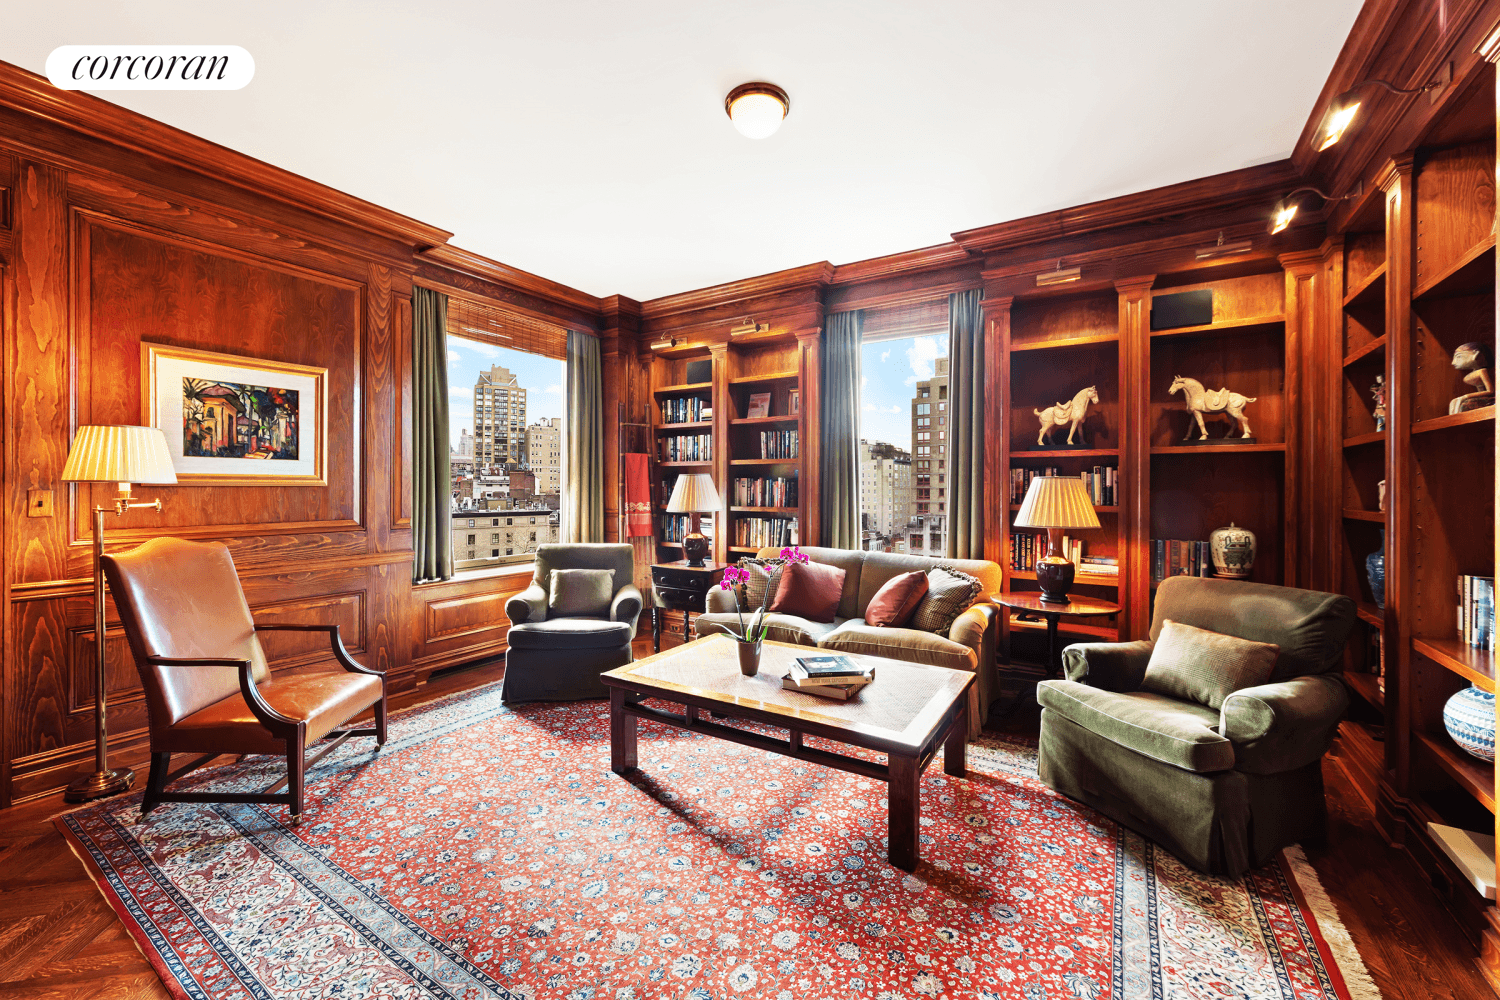 Apartment 10A at 950 Park Avenue offers everything you dream about in a Park Avenue home.